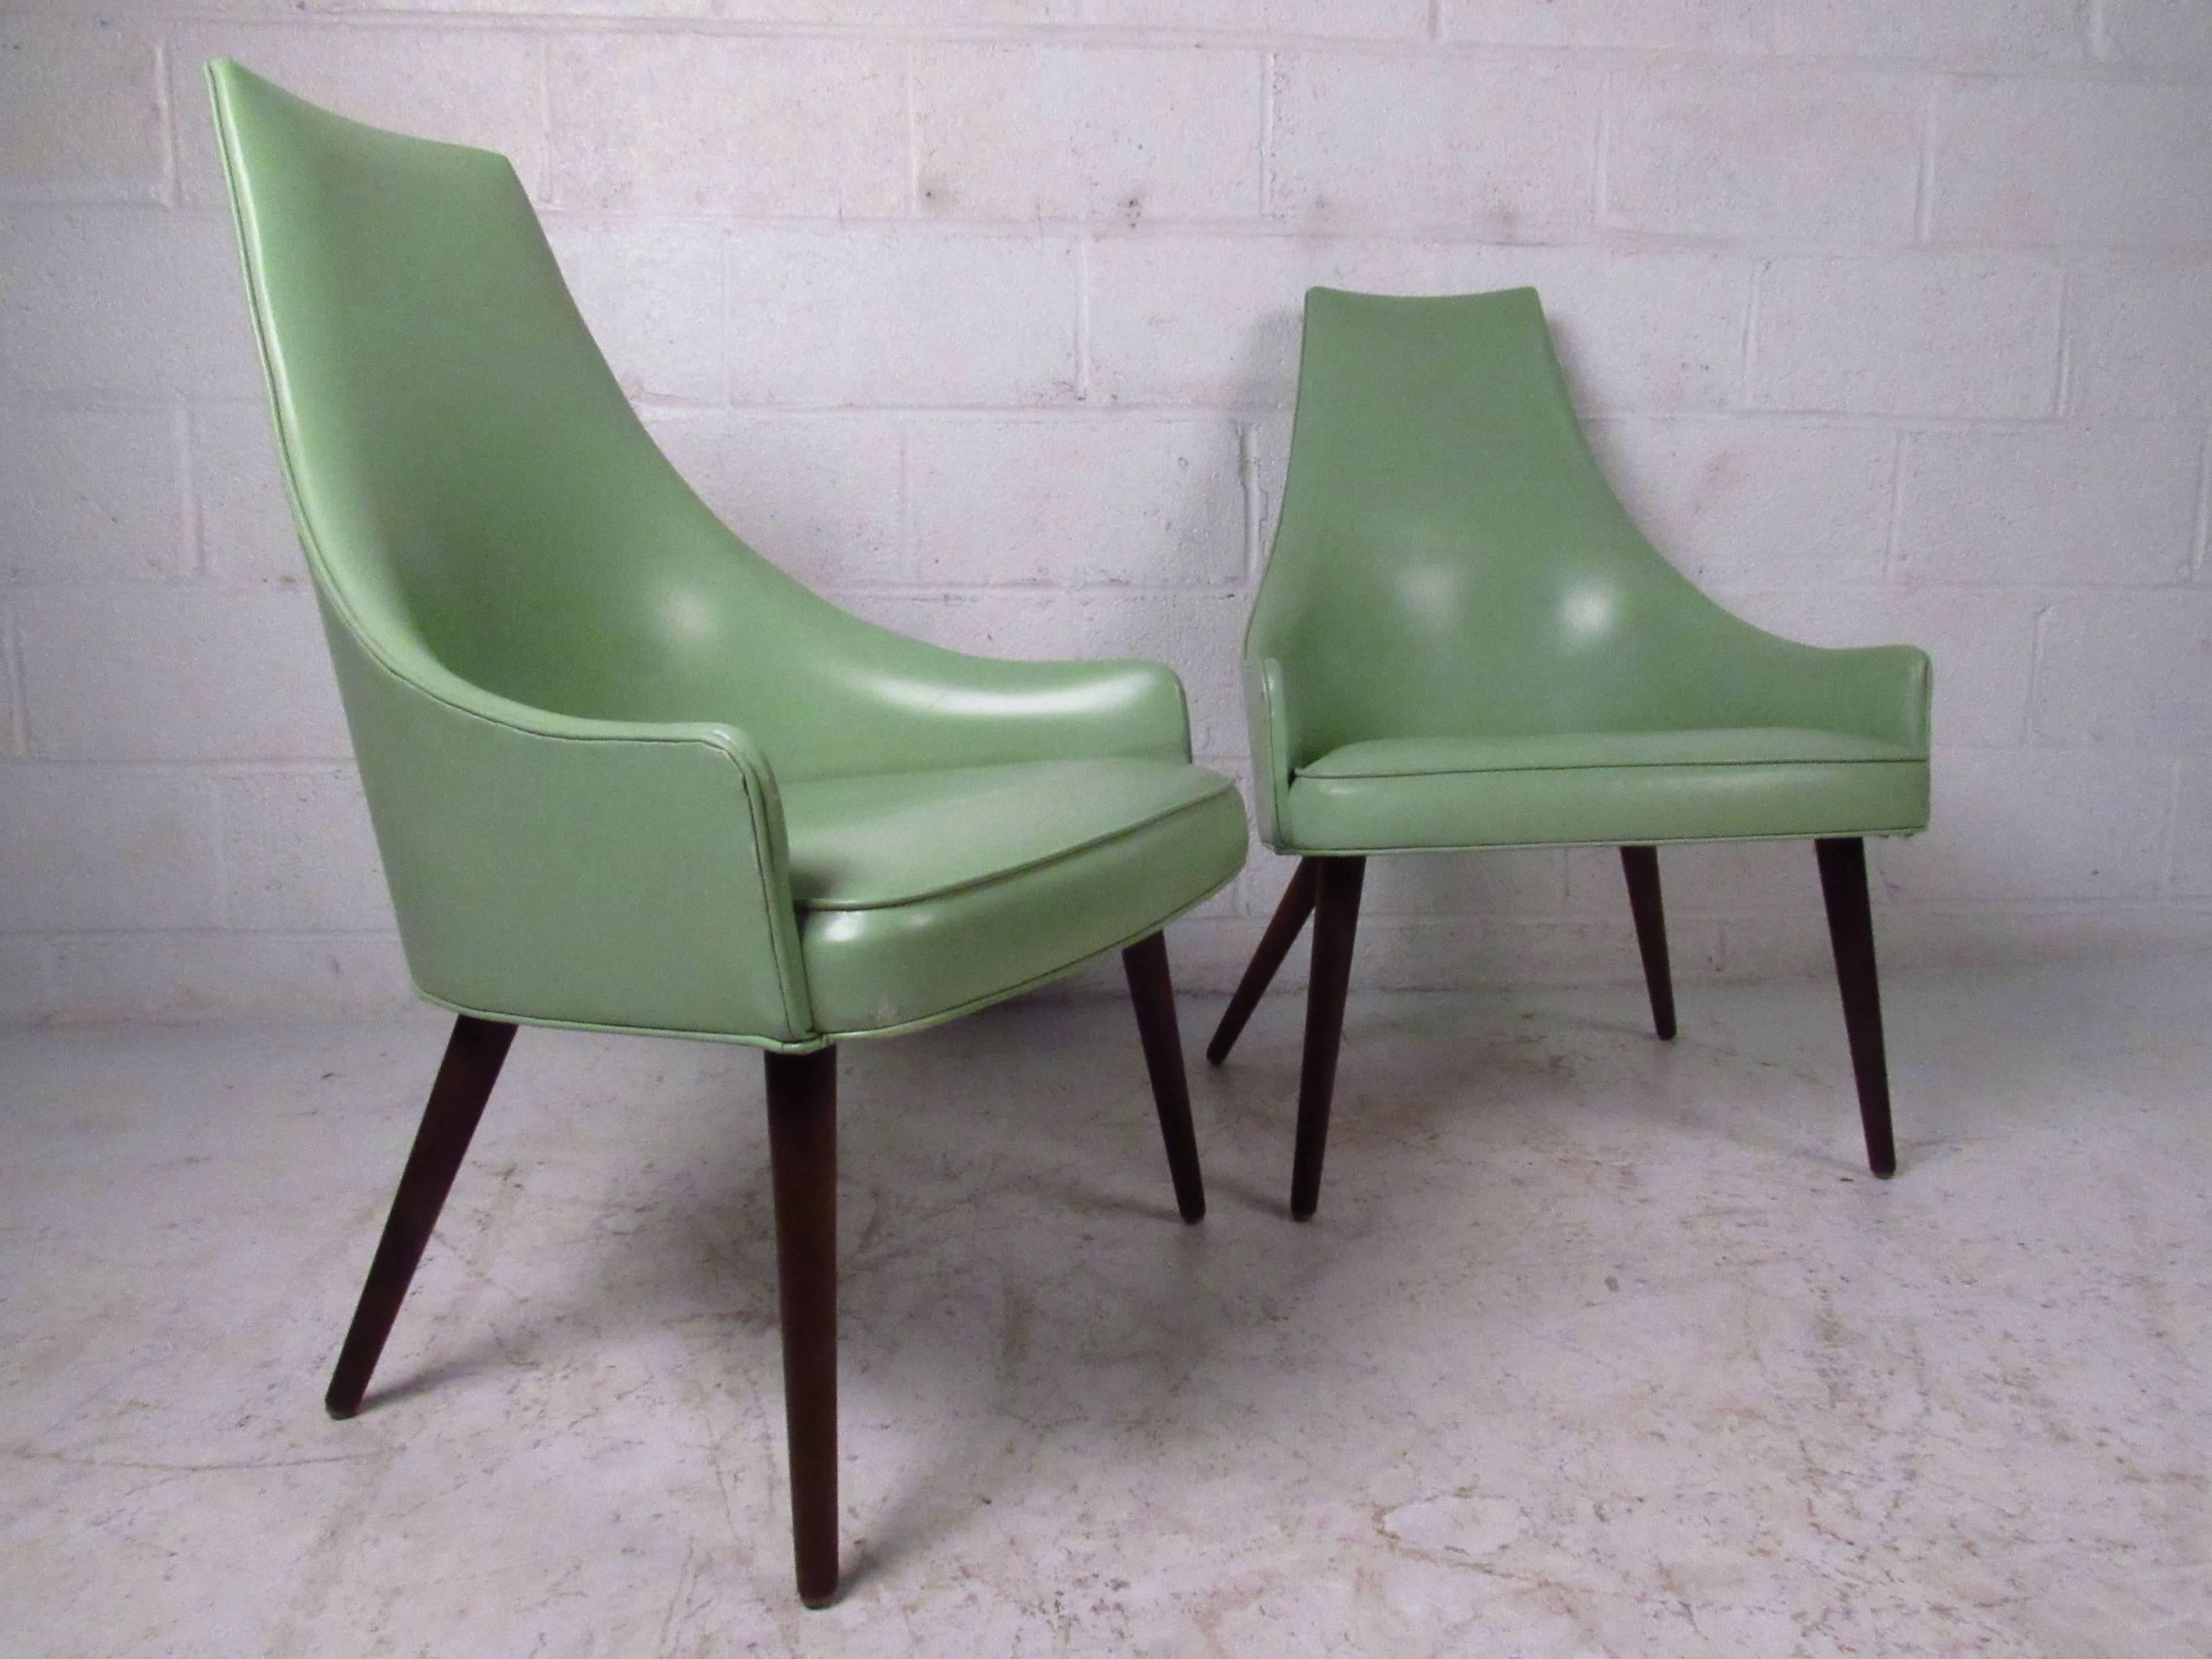 This beautiful vintage pair of lounge chairs feature ample vinyl upholstered seats with unique sculpted high backs. Tapered legs and low profile armrests add to the midcentury style of the set. Please confirm item location (NY or NJ).